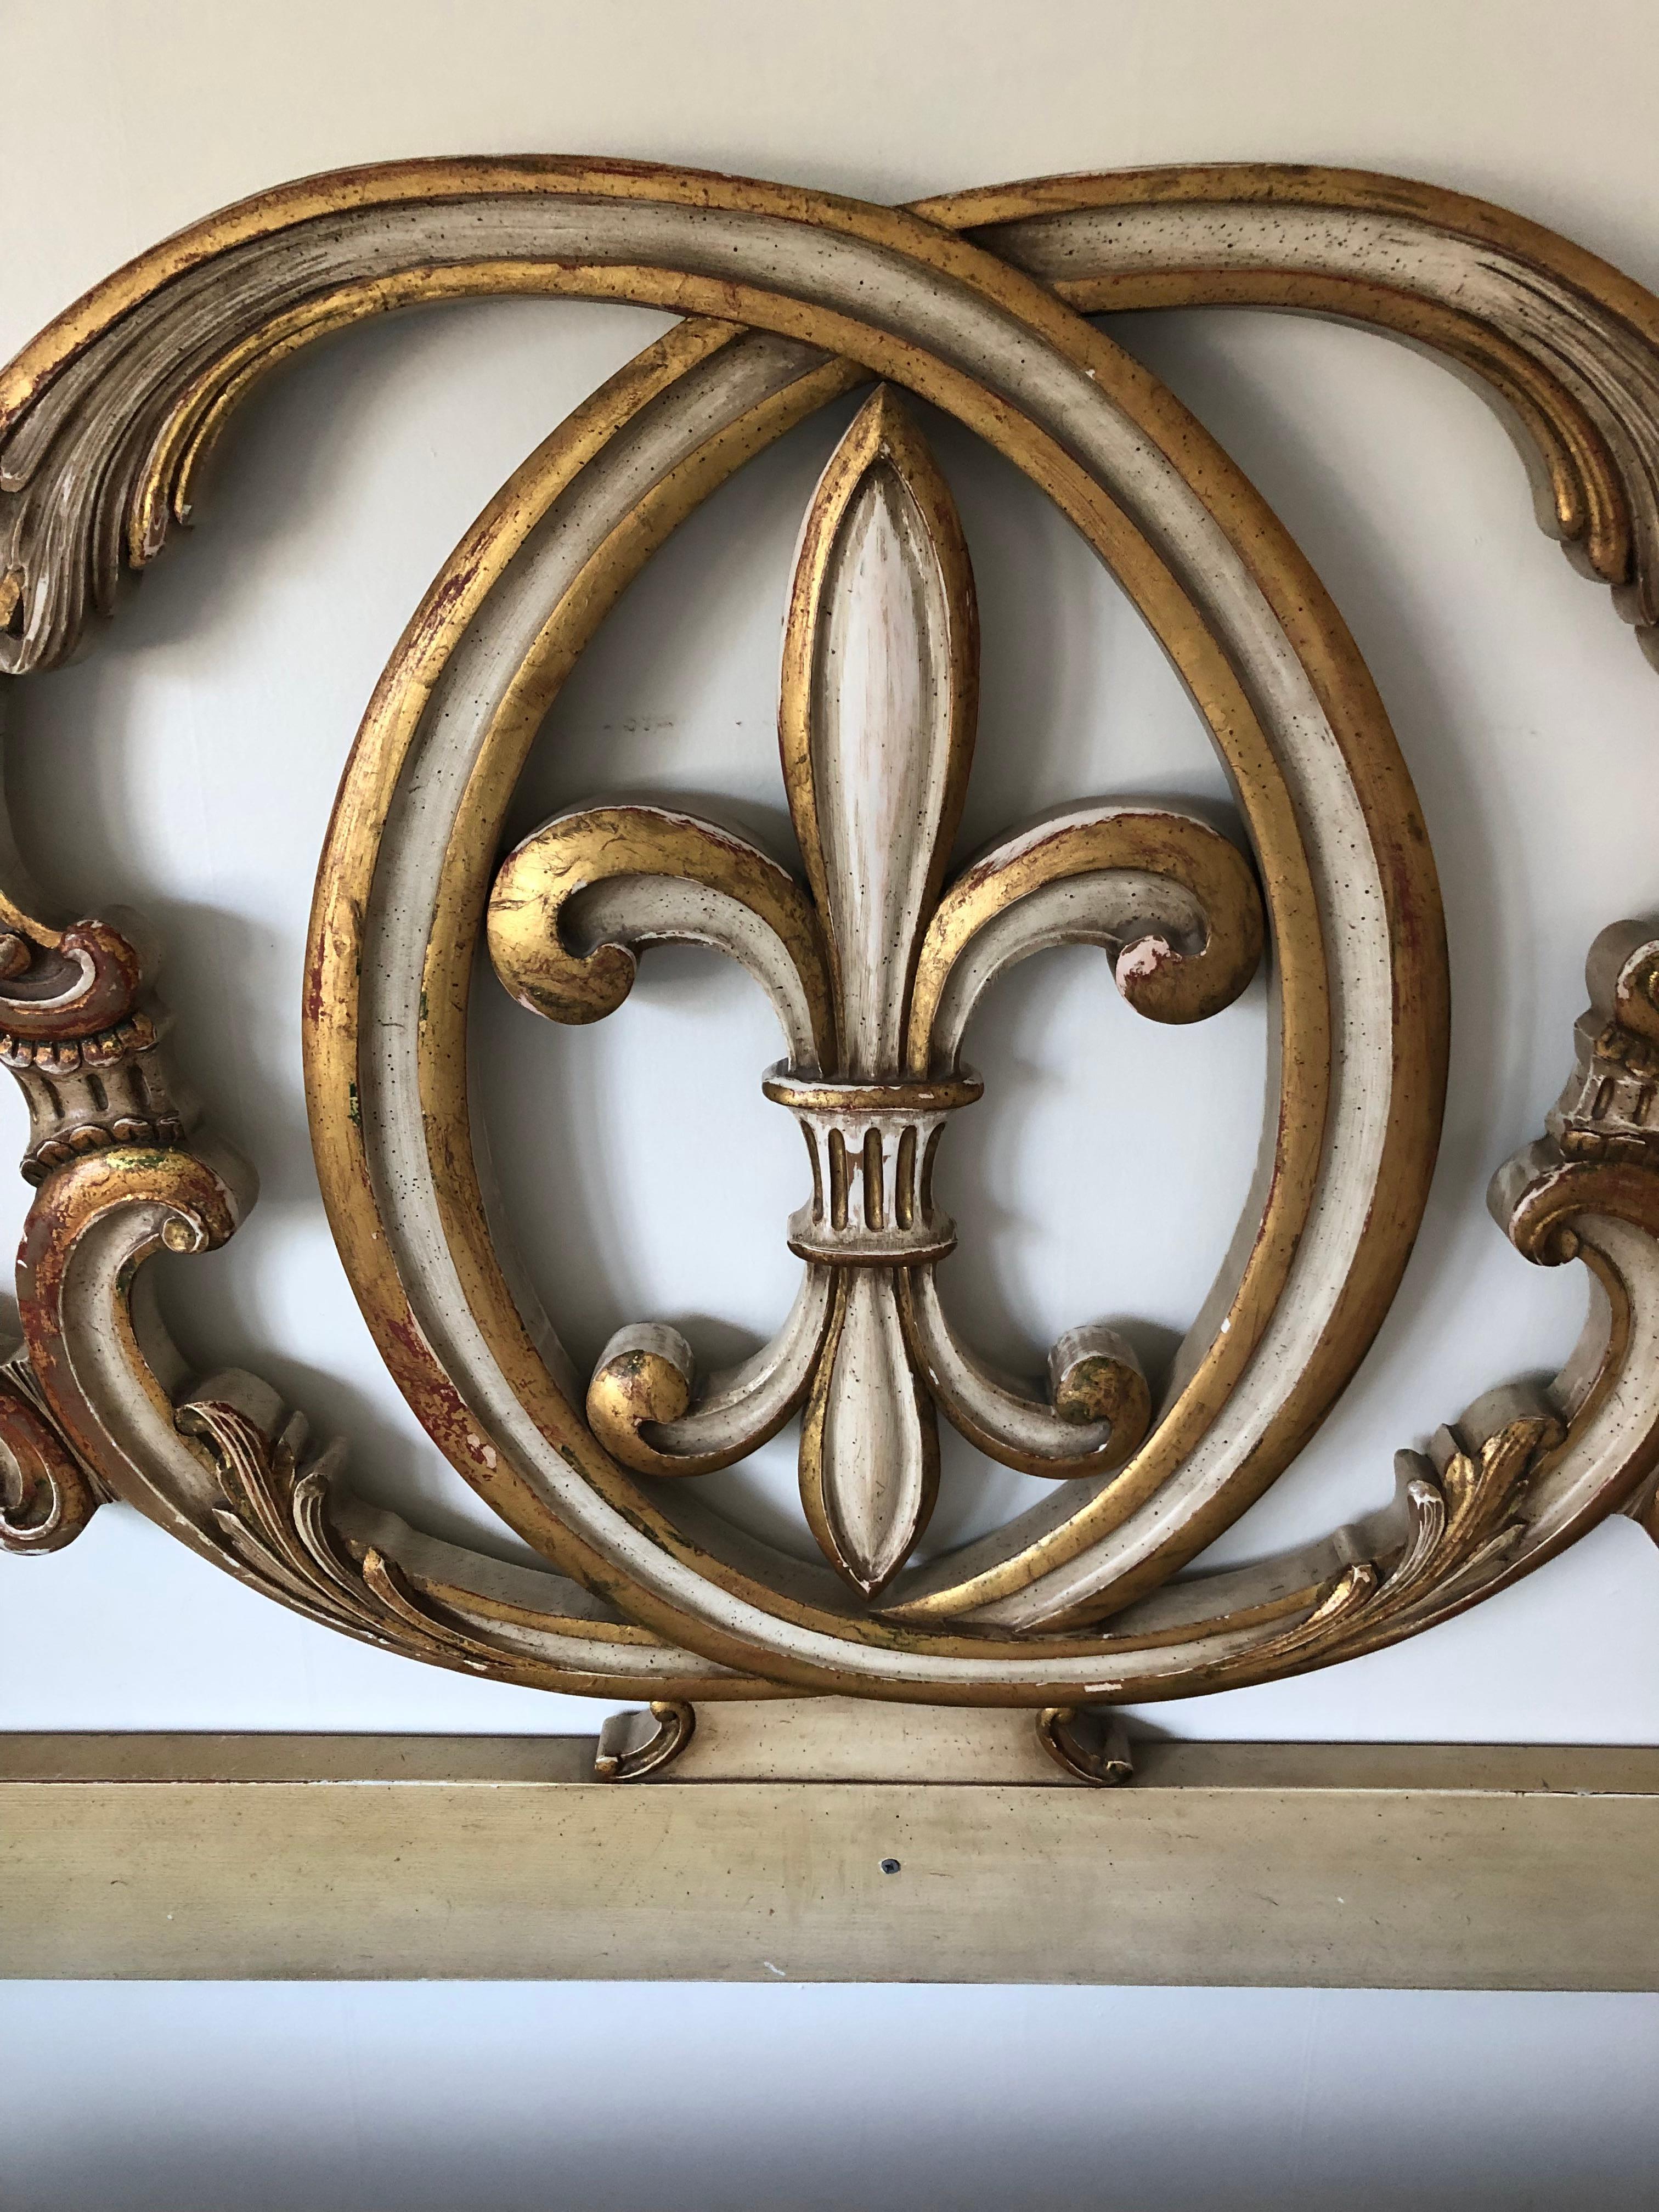 A rare find in a vintage glamorous king size headboard having carved and painted wood in an antiqued cream with gilding and some red underpaint visible. A central striking and timeless fleur di lis symbol sets the tone for this moviestar headboard.